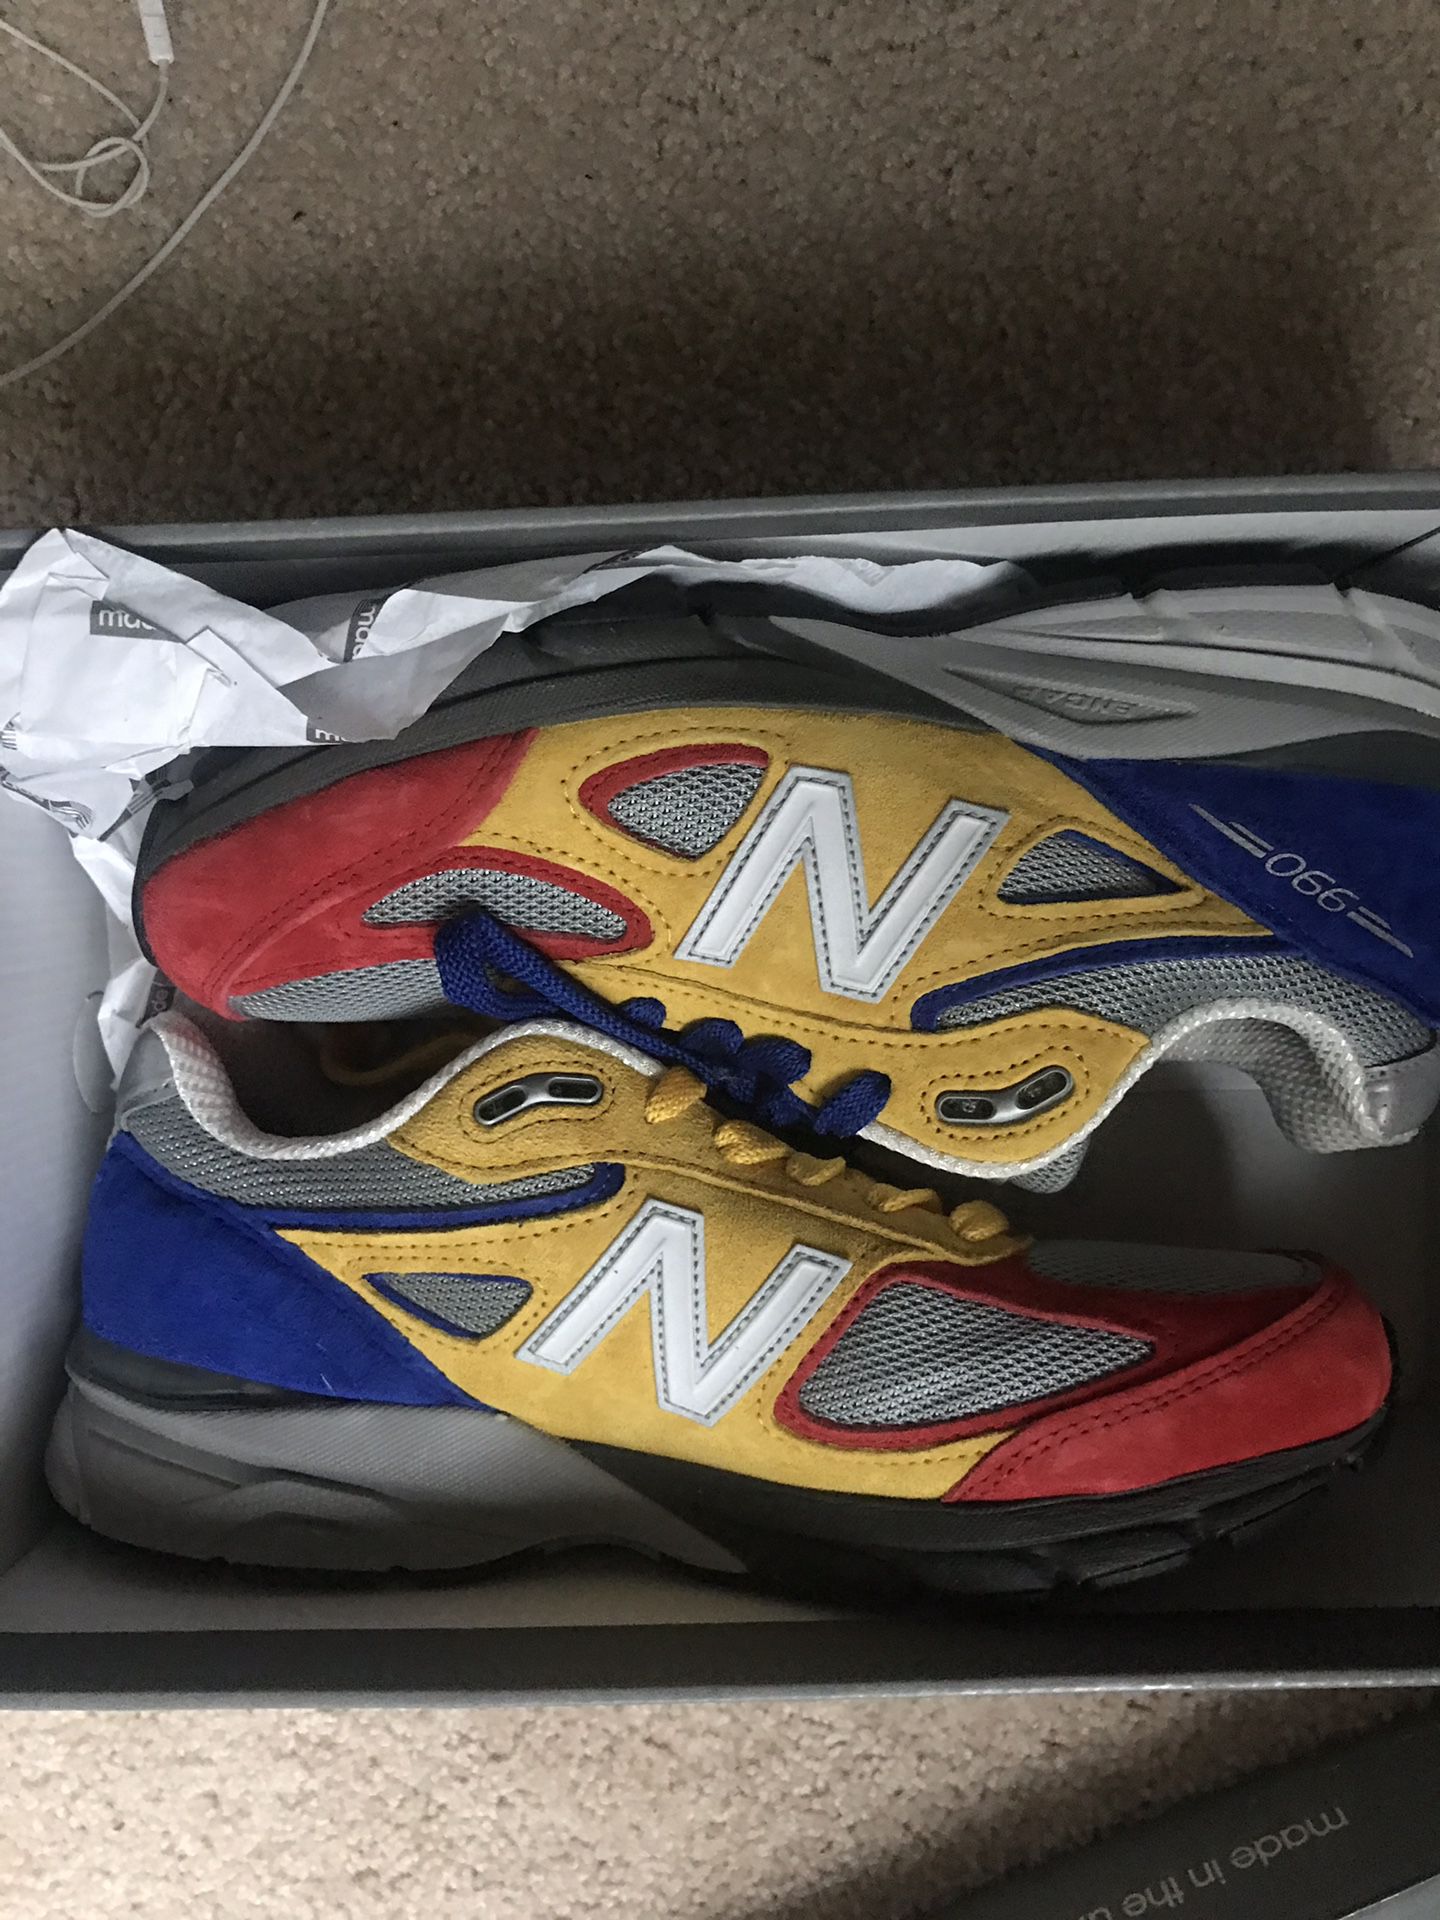 EAT 990s Size 8 BRAND NEW